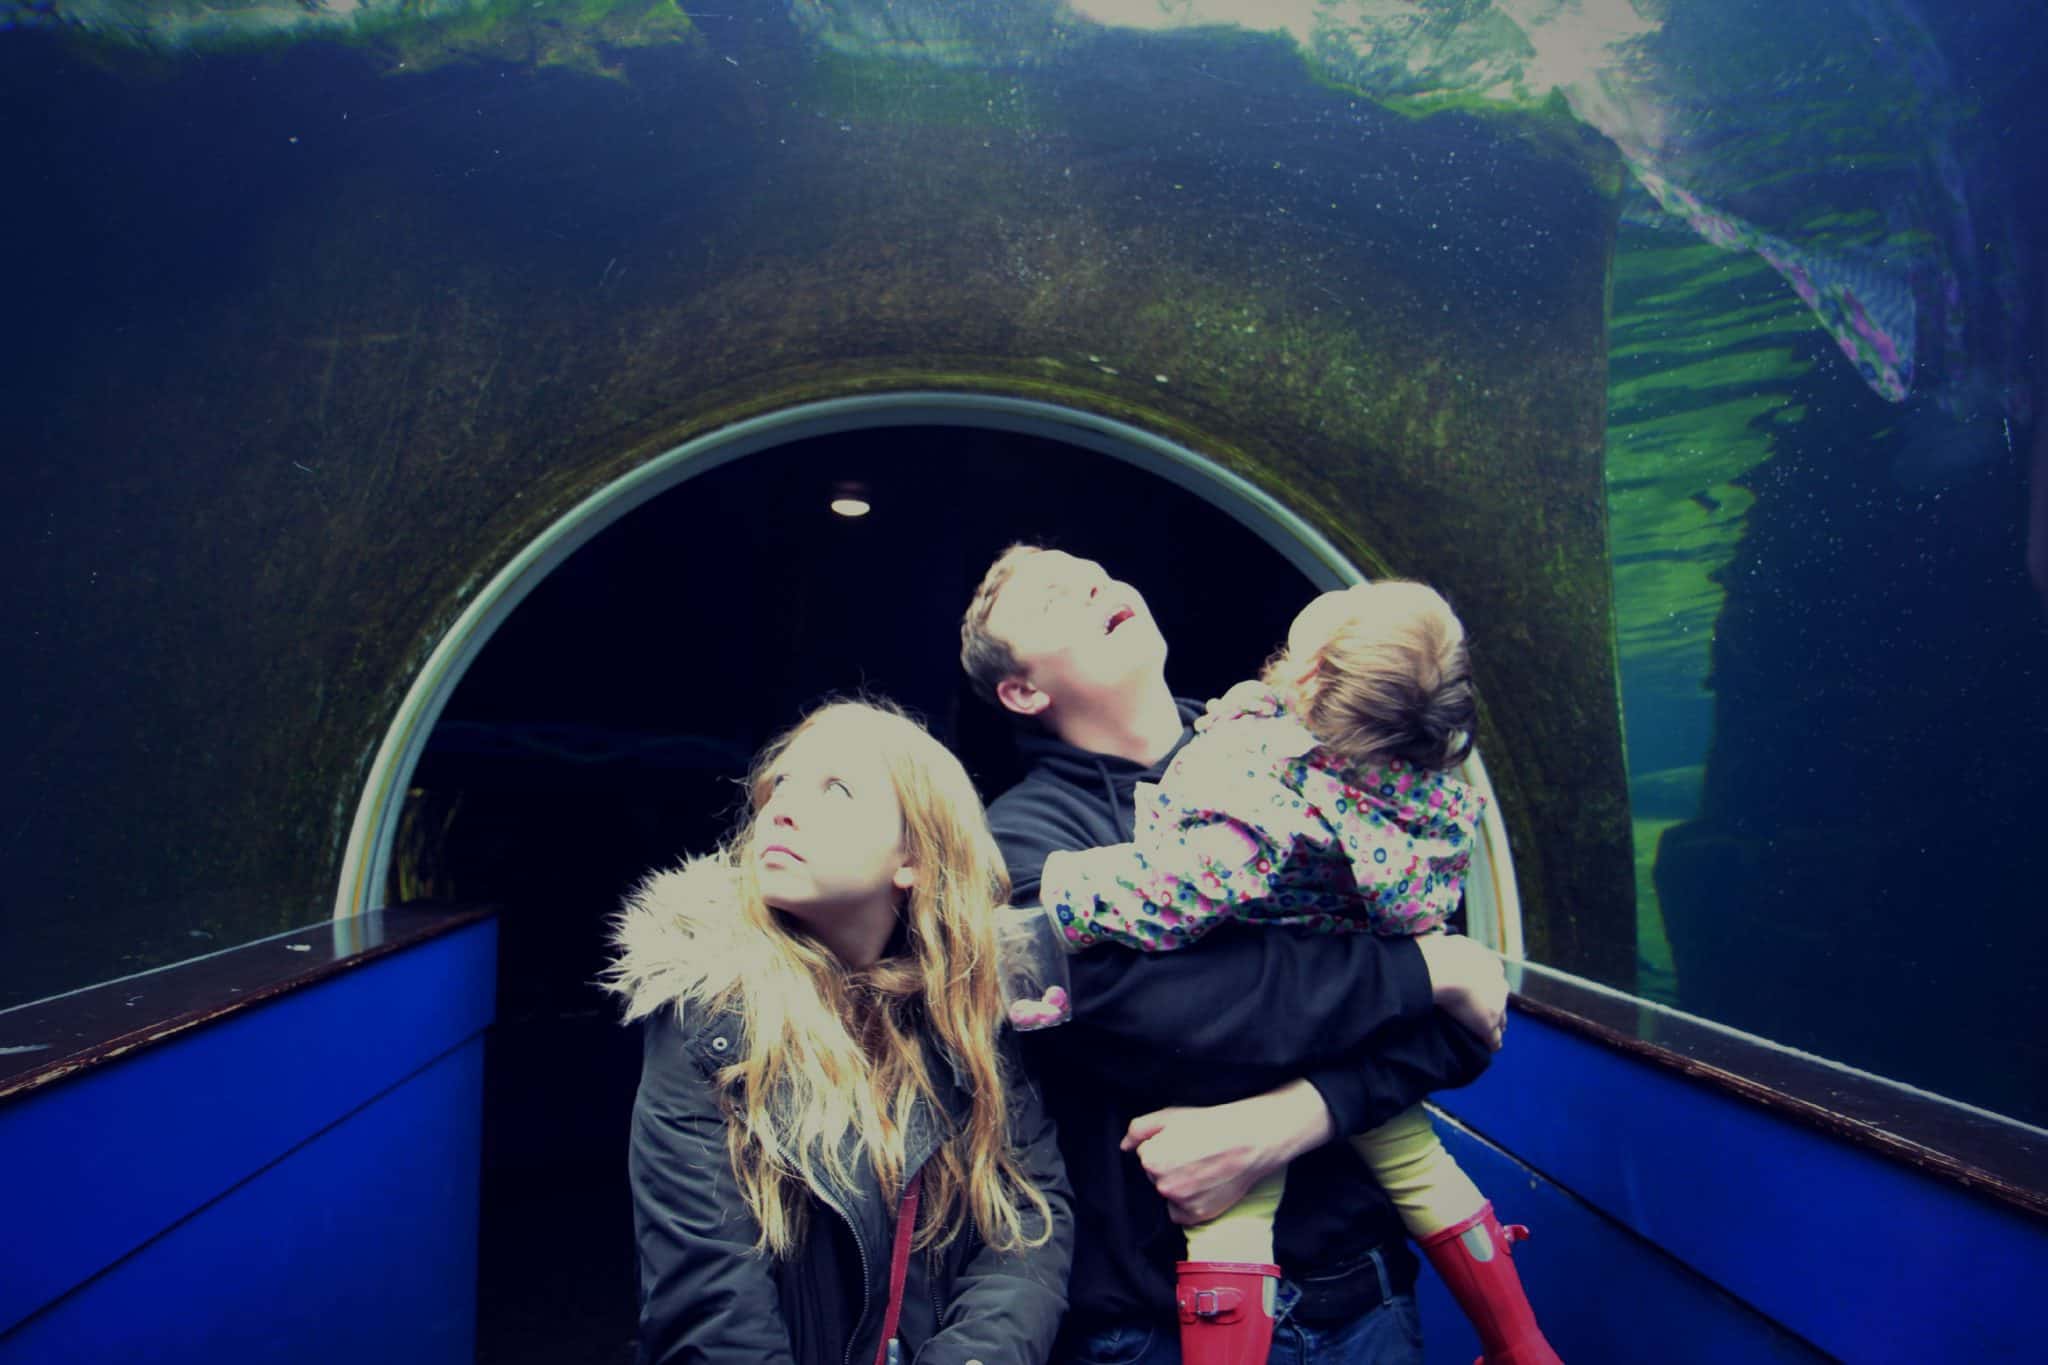 In the underwater viewing tunnel at Bristol Zoo